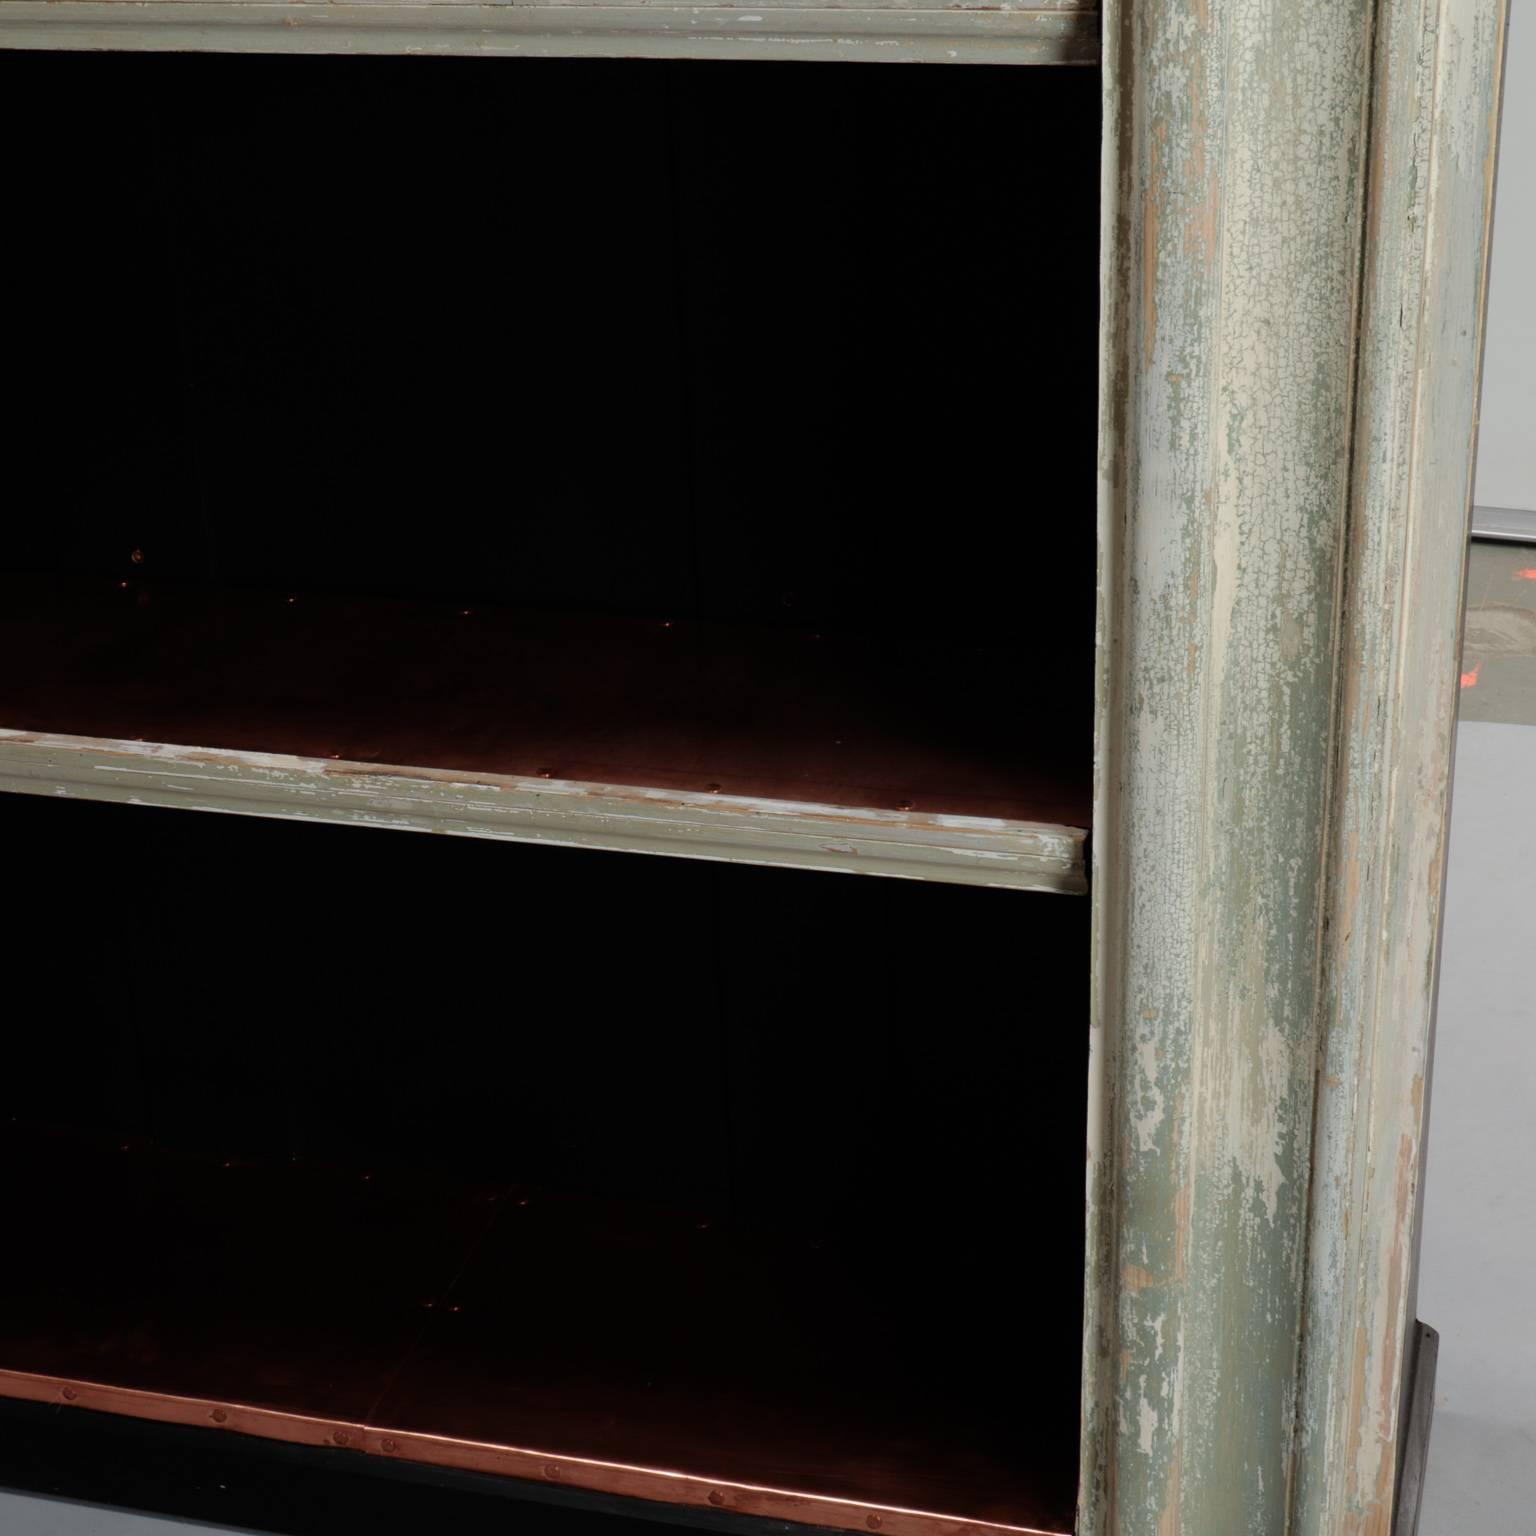 19th Century Door Frame Bookcase with Copper Lined Shelves In Good Condition For Sale In Troy, MI